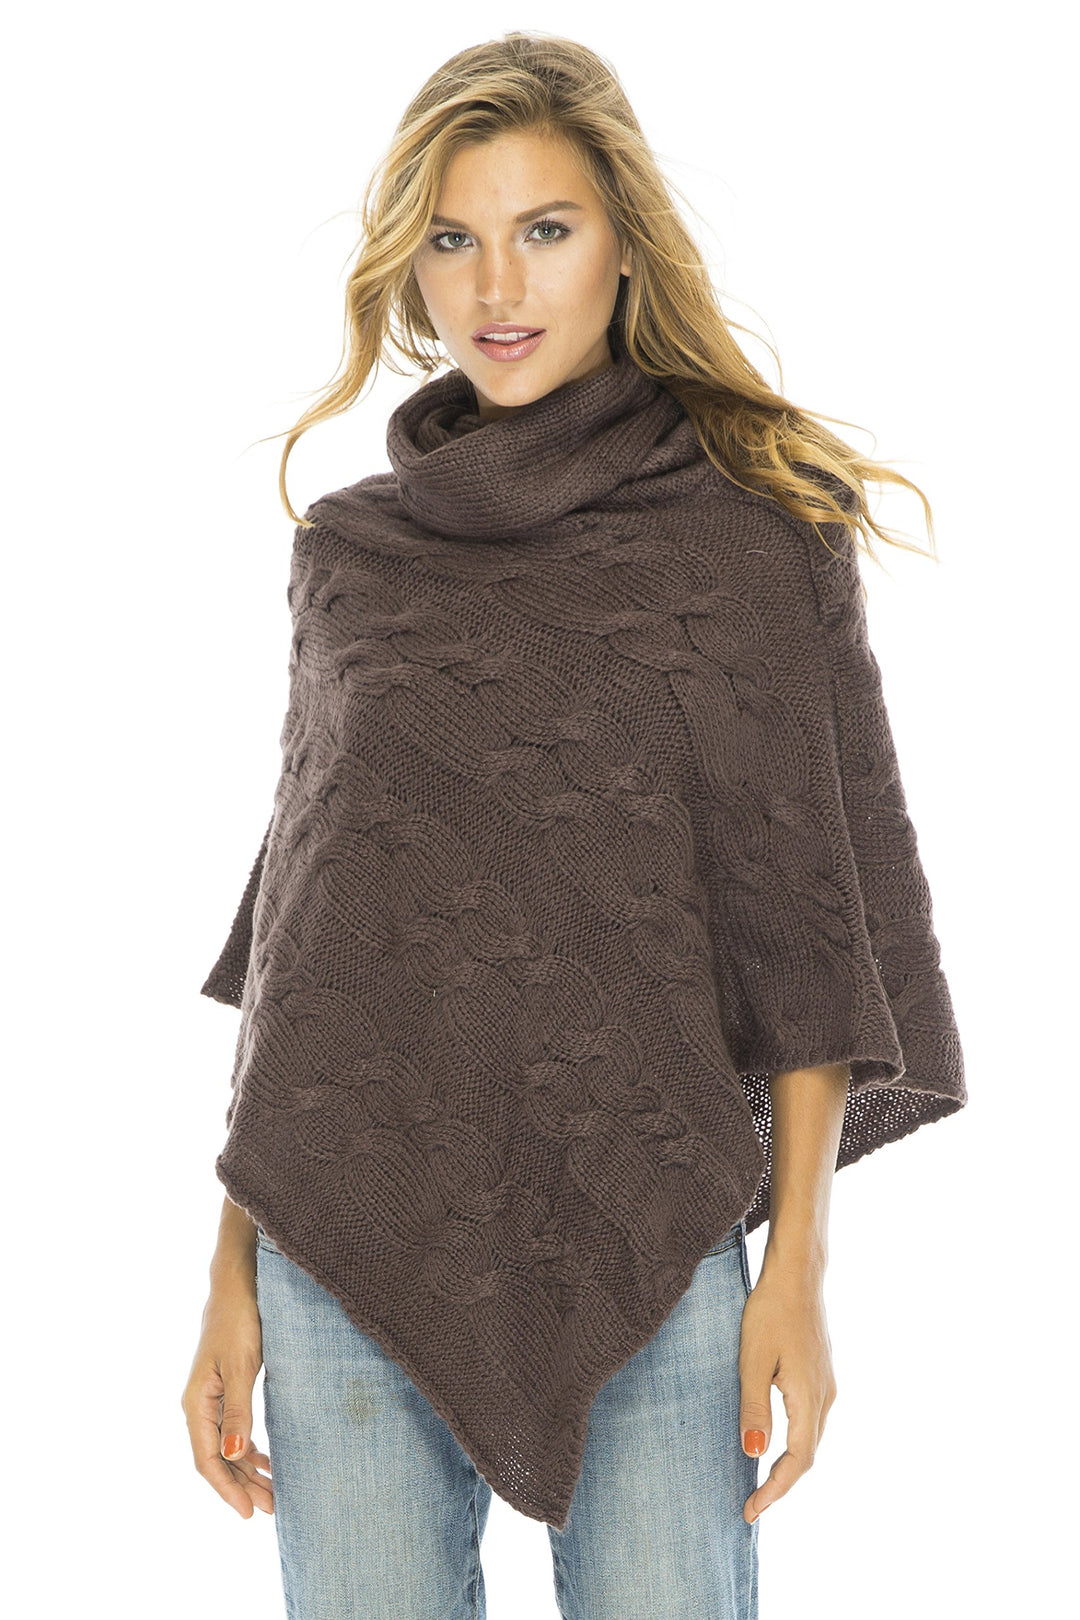 Back From Bali Womens Cable Knit Poncho Turtle Neck Sweater Cape Soft Casual